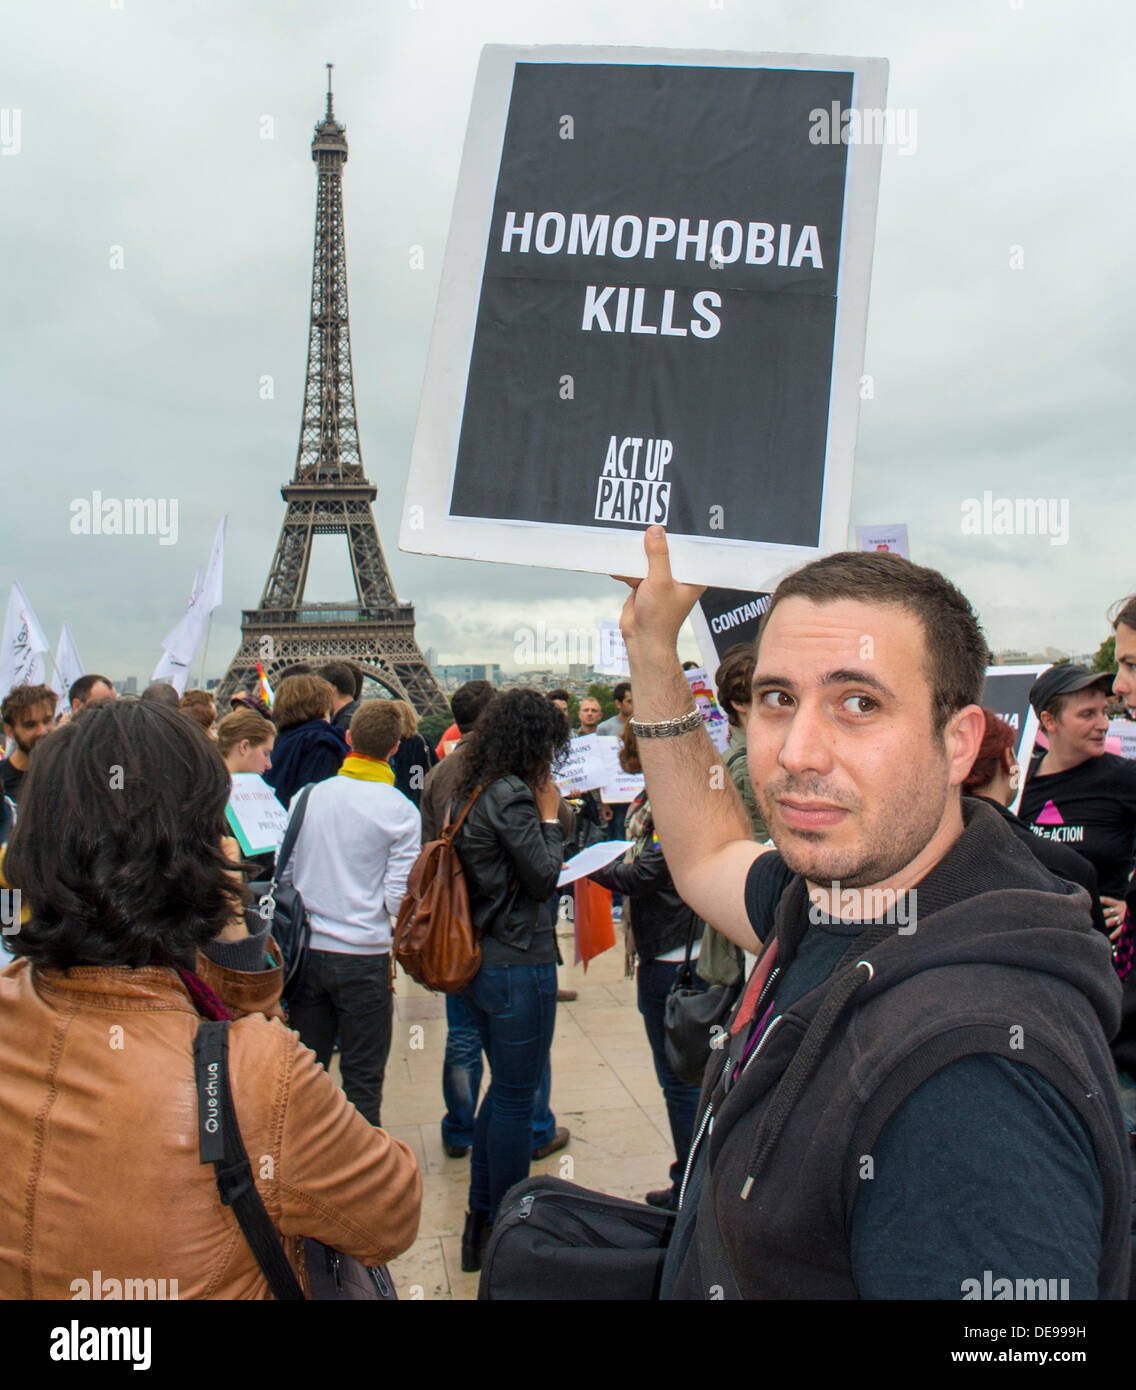 Paris, France. Several LGBT Activism Groups (Act Up-Paris) Against Homophobia Law, in Russia, Demonstration, Man Holding Sign 'Homophobia Kills' activist protes, gay men problemt, act up poster, violence against gay men, France Protests Stock Photo